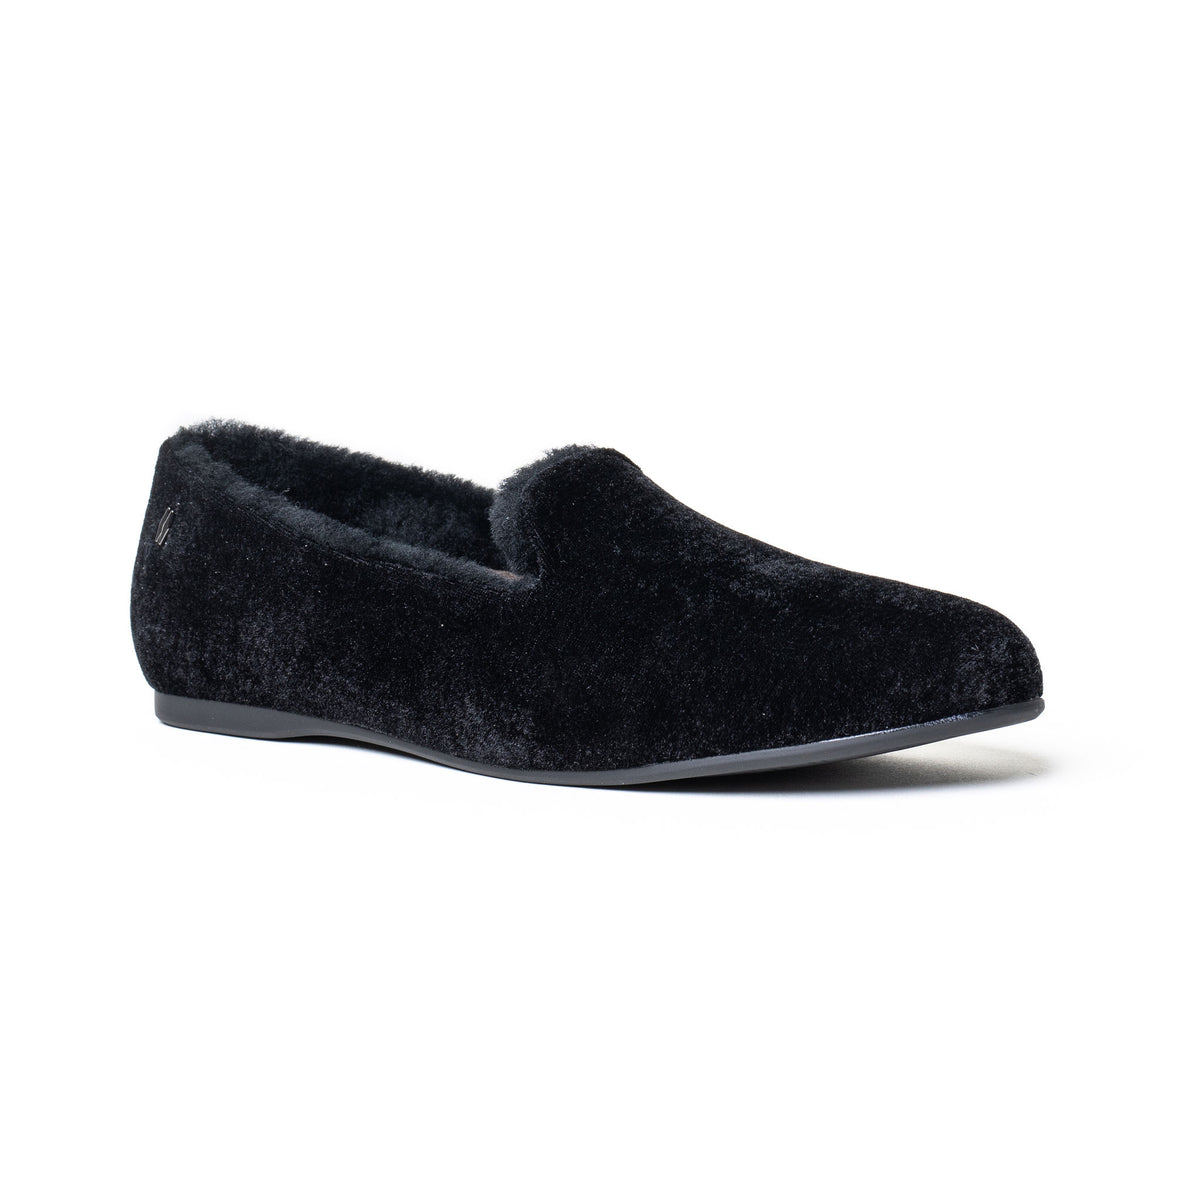 The Audrey - Classic Loafer